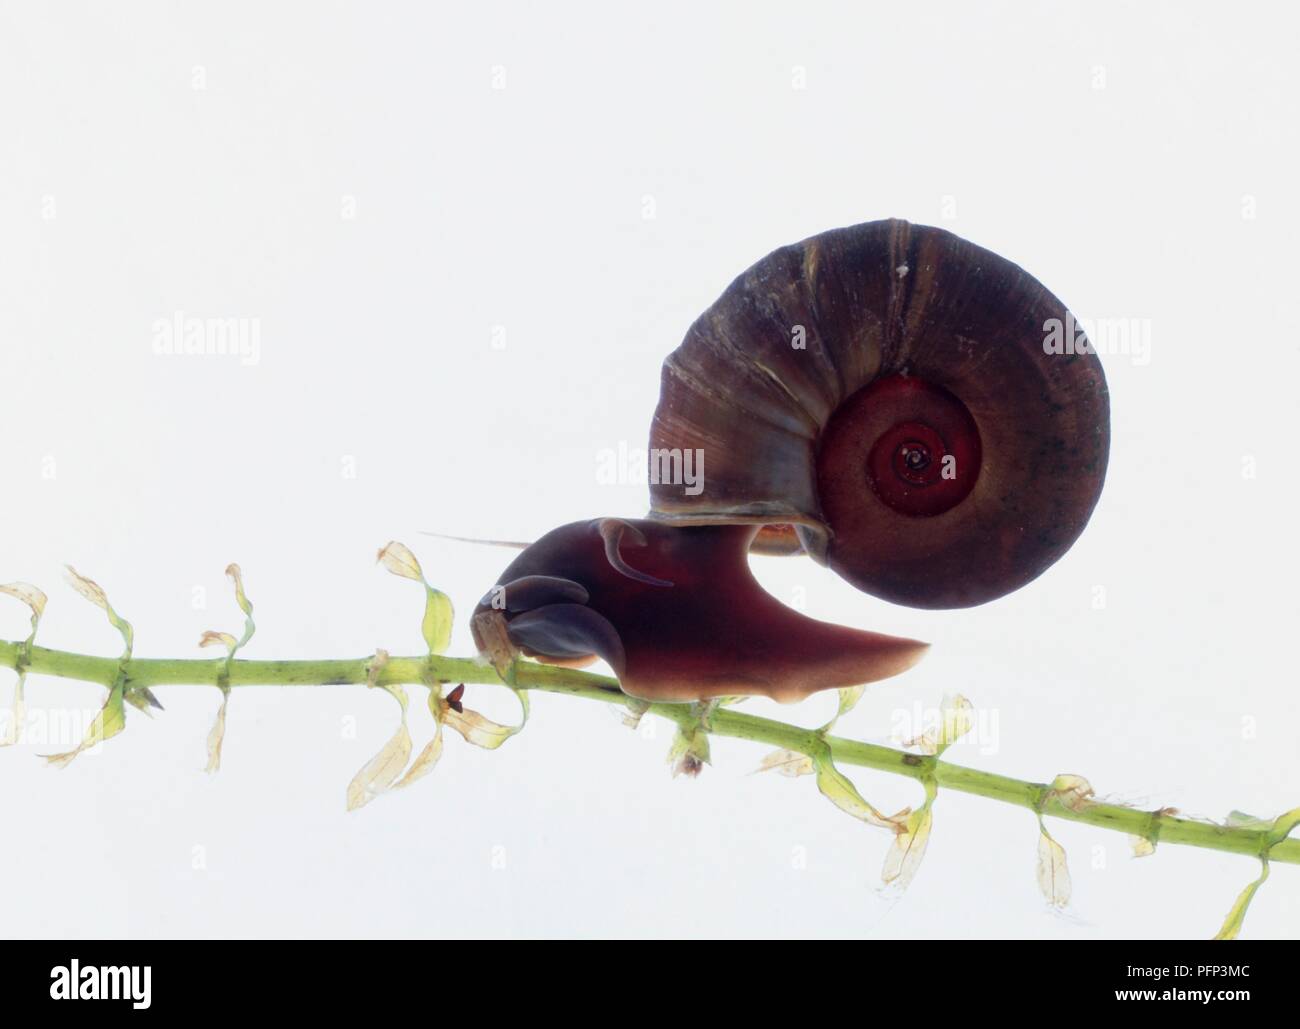 Pond snail (Lymnaeidae) on the stem of an aquatic plant, eating leaves, side view Stock Photo